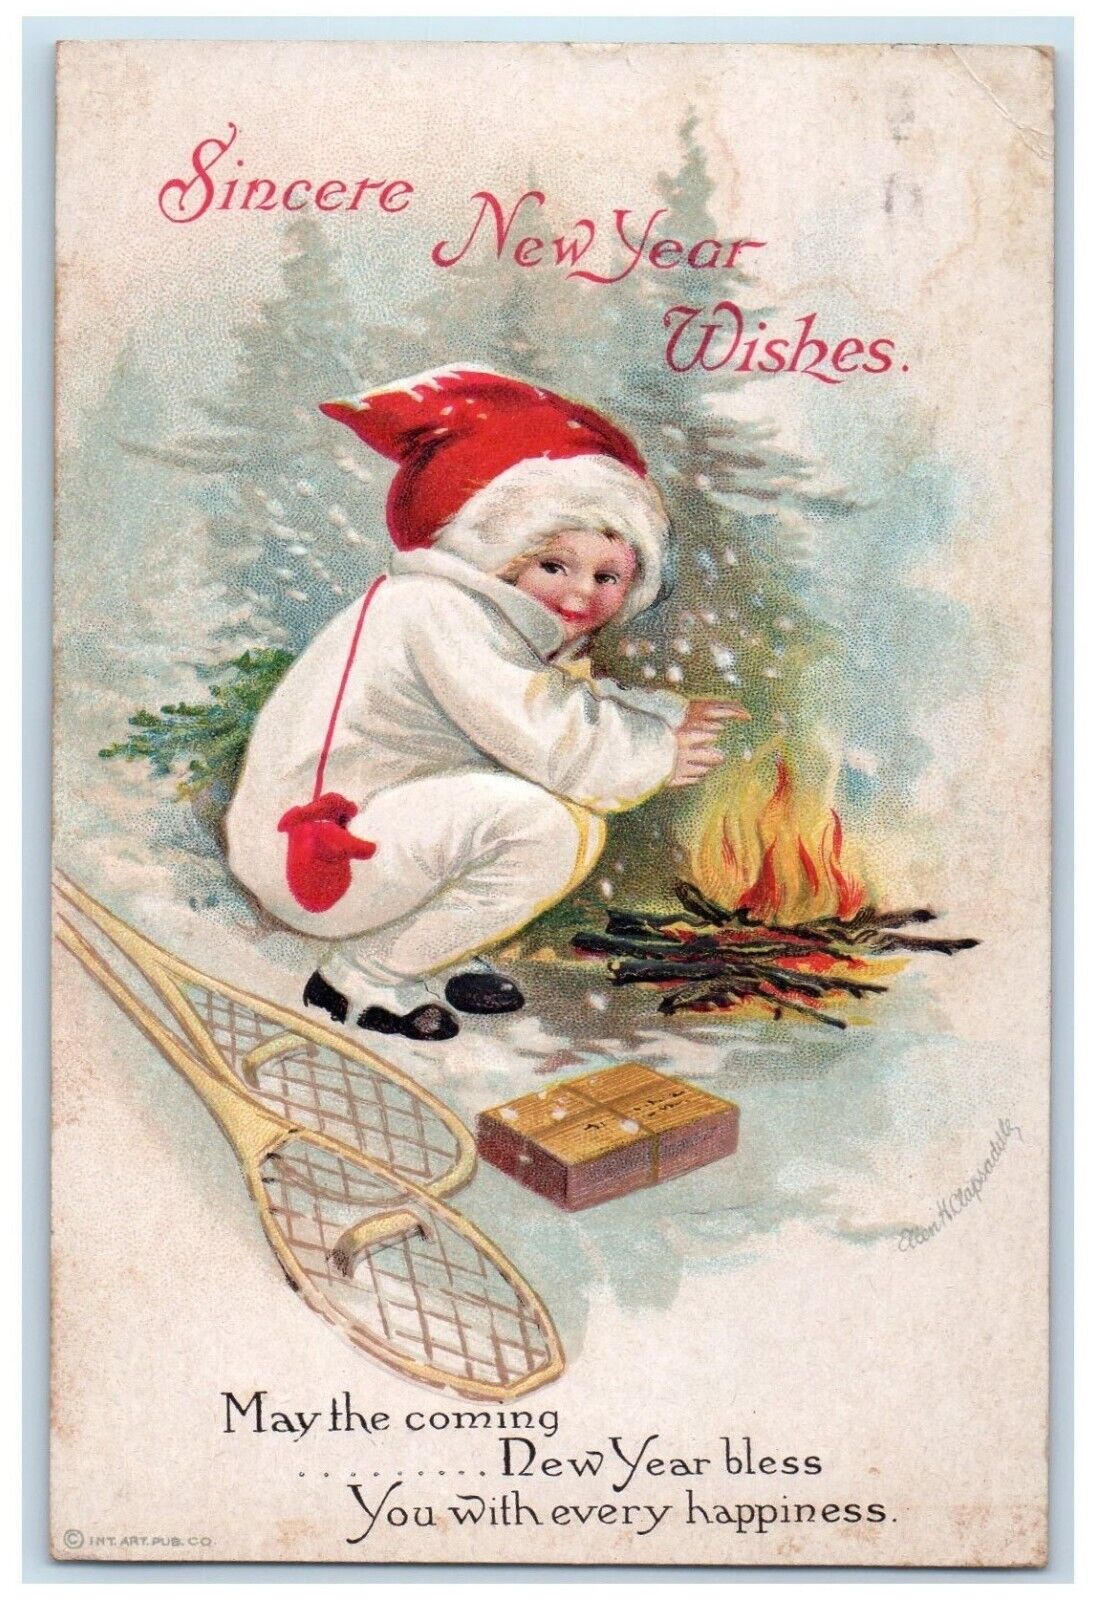 New Year Child Fire Burning Snow Shoes Ellen Clapsaddle Artist Signed Postcard